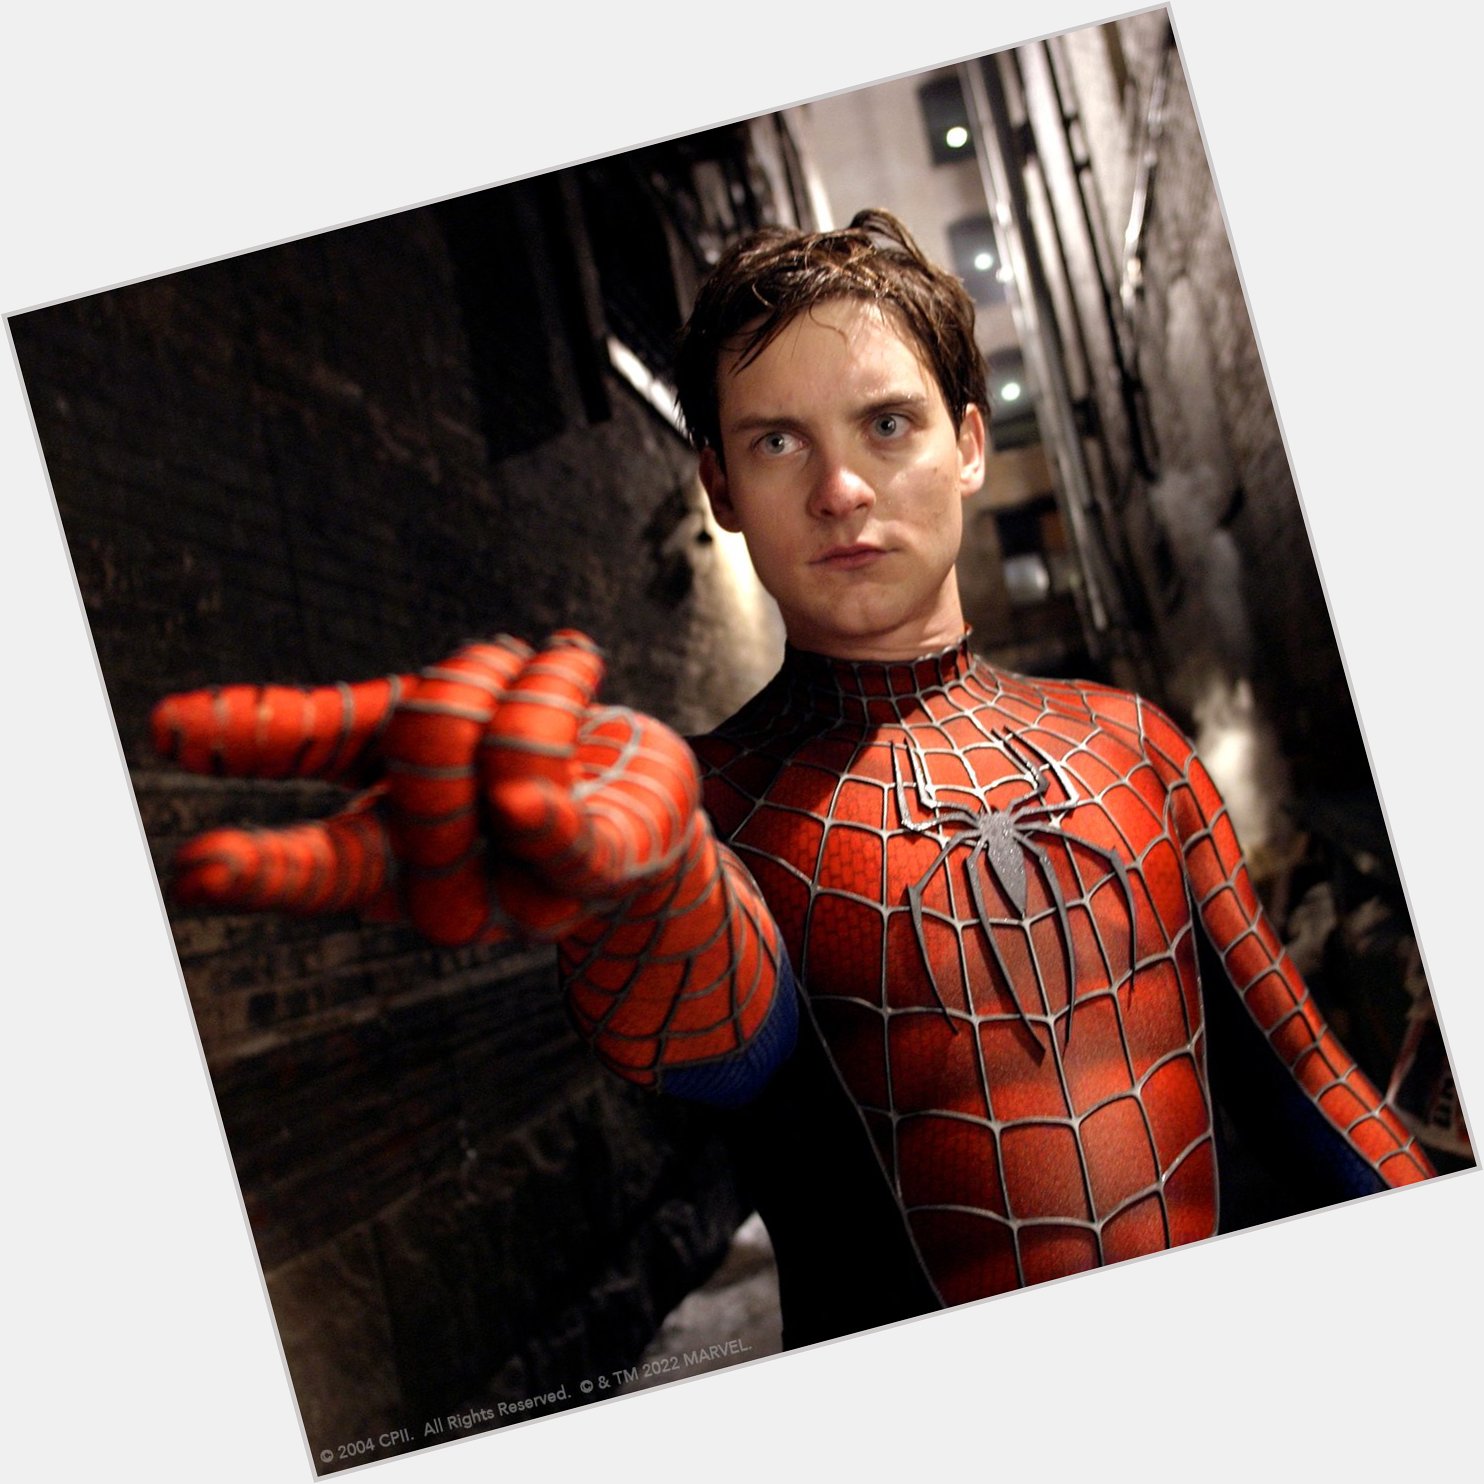 Happy birthday to the legend, Tobey Maguire!  